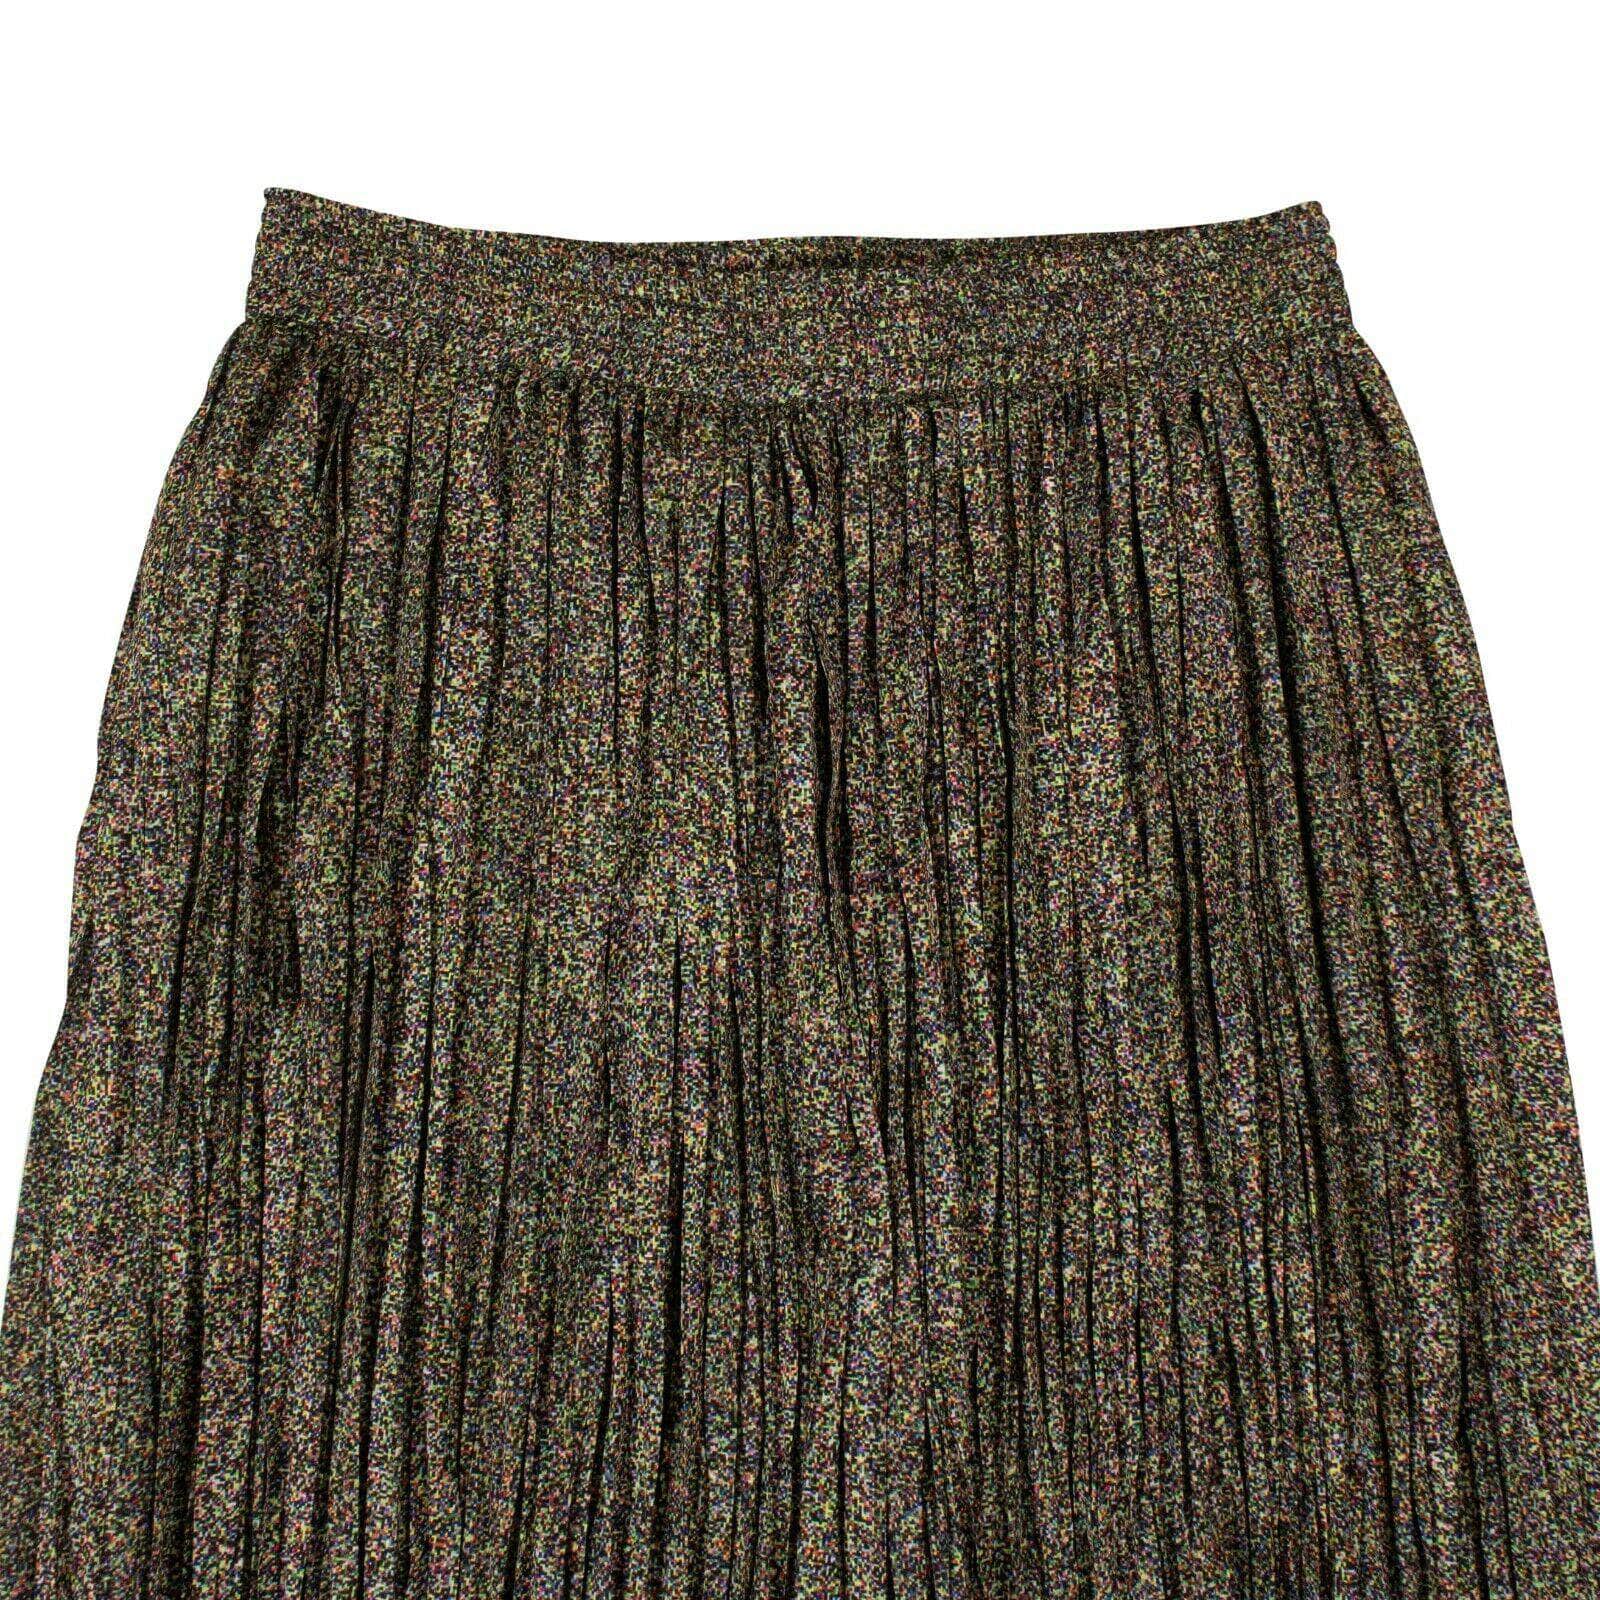 A_Plan_Application a_plan_application, channelenable-all, chicmi, couponcollection, gender-womens, july4th, main-clothing, size-s, under-250, womens-pleated-skirts S Multicolored Pleated Midi Skirt 82NGG-AP-4/S 82NGG-AP-4/S